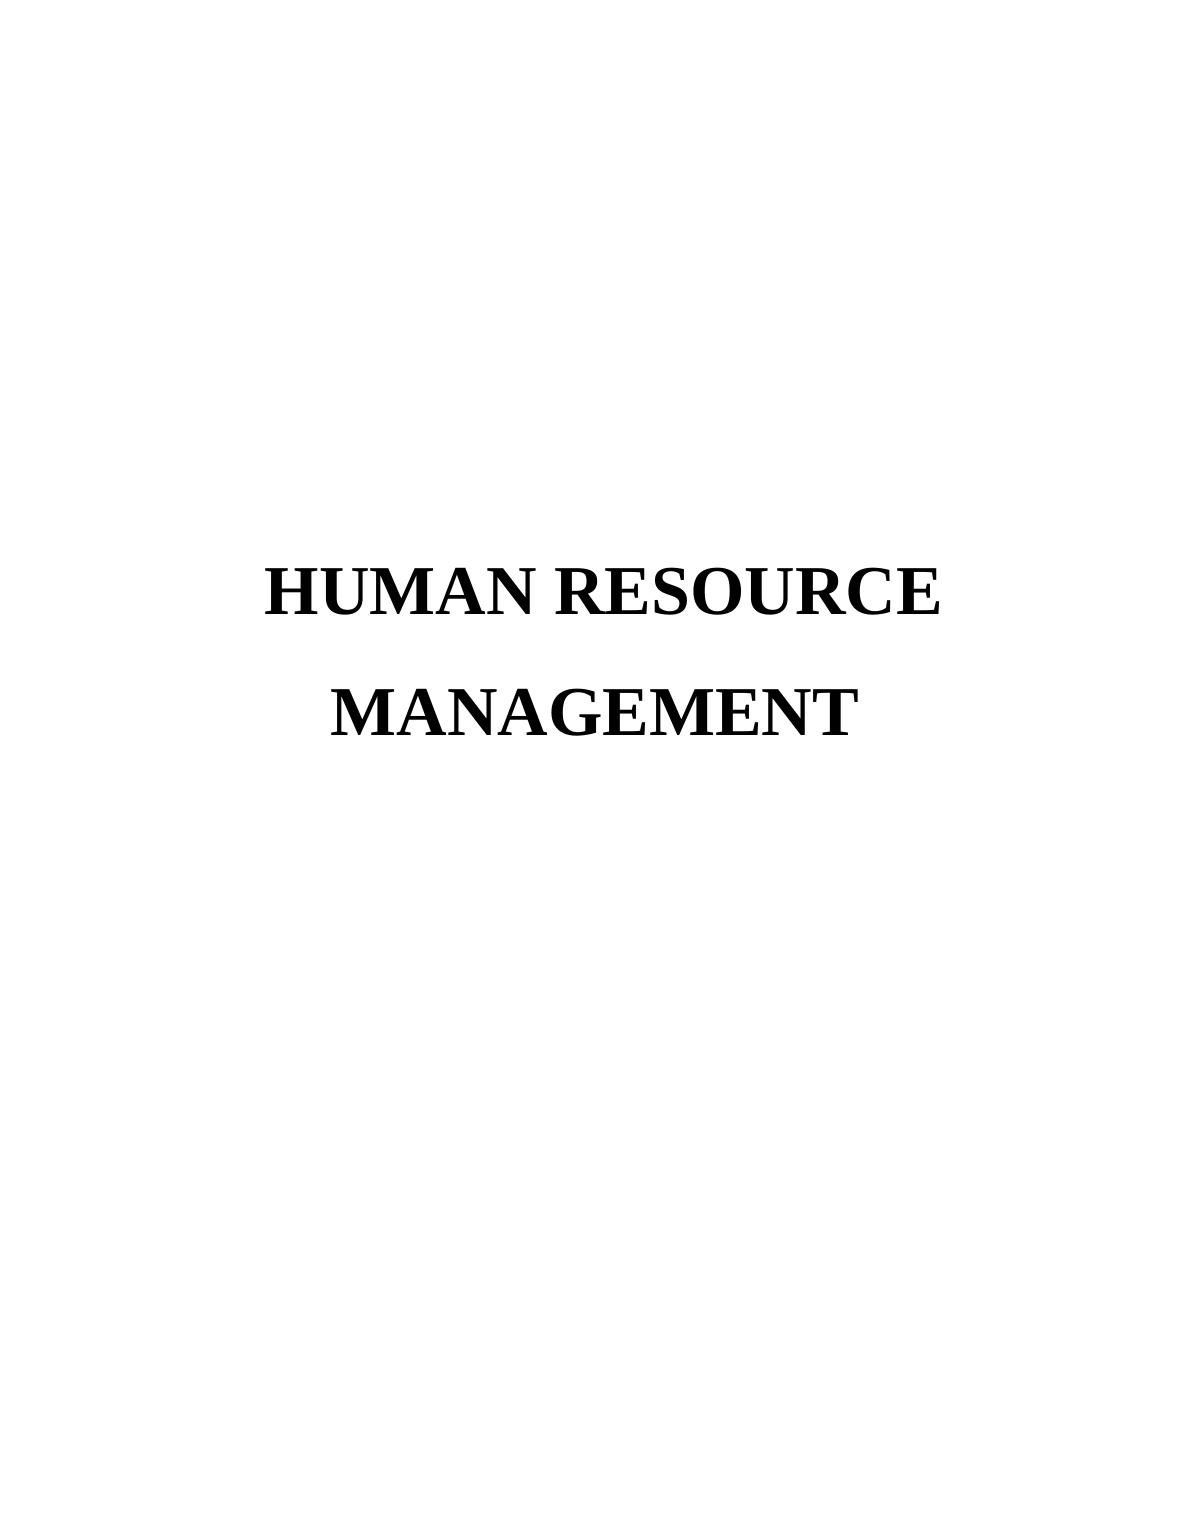 Report on Human Resource Management of Sun Count Ltd_1